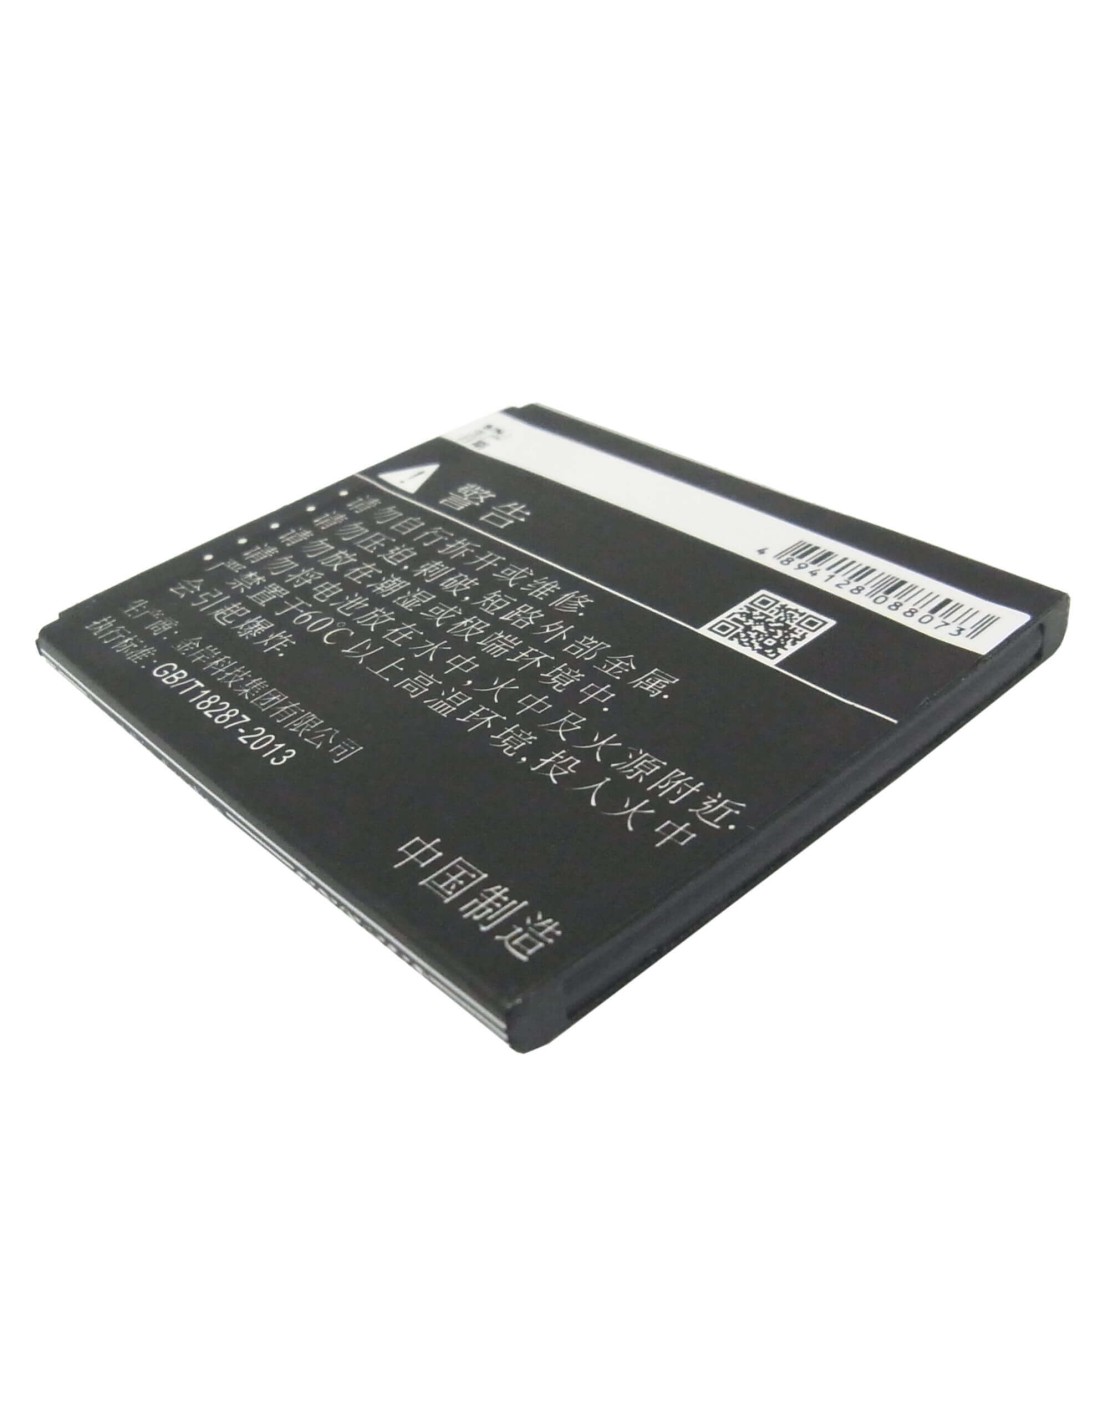 Battery for Coolpad 7290 3.7V, 1450mAh - 5.37Wh